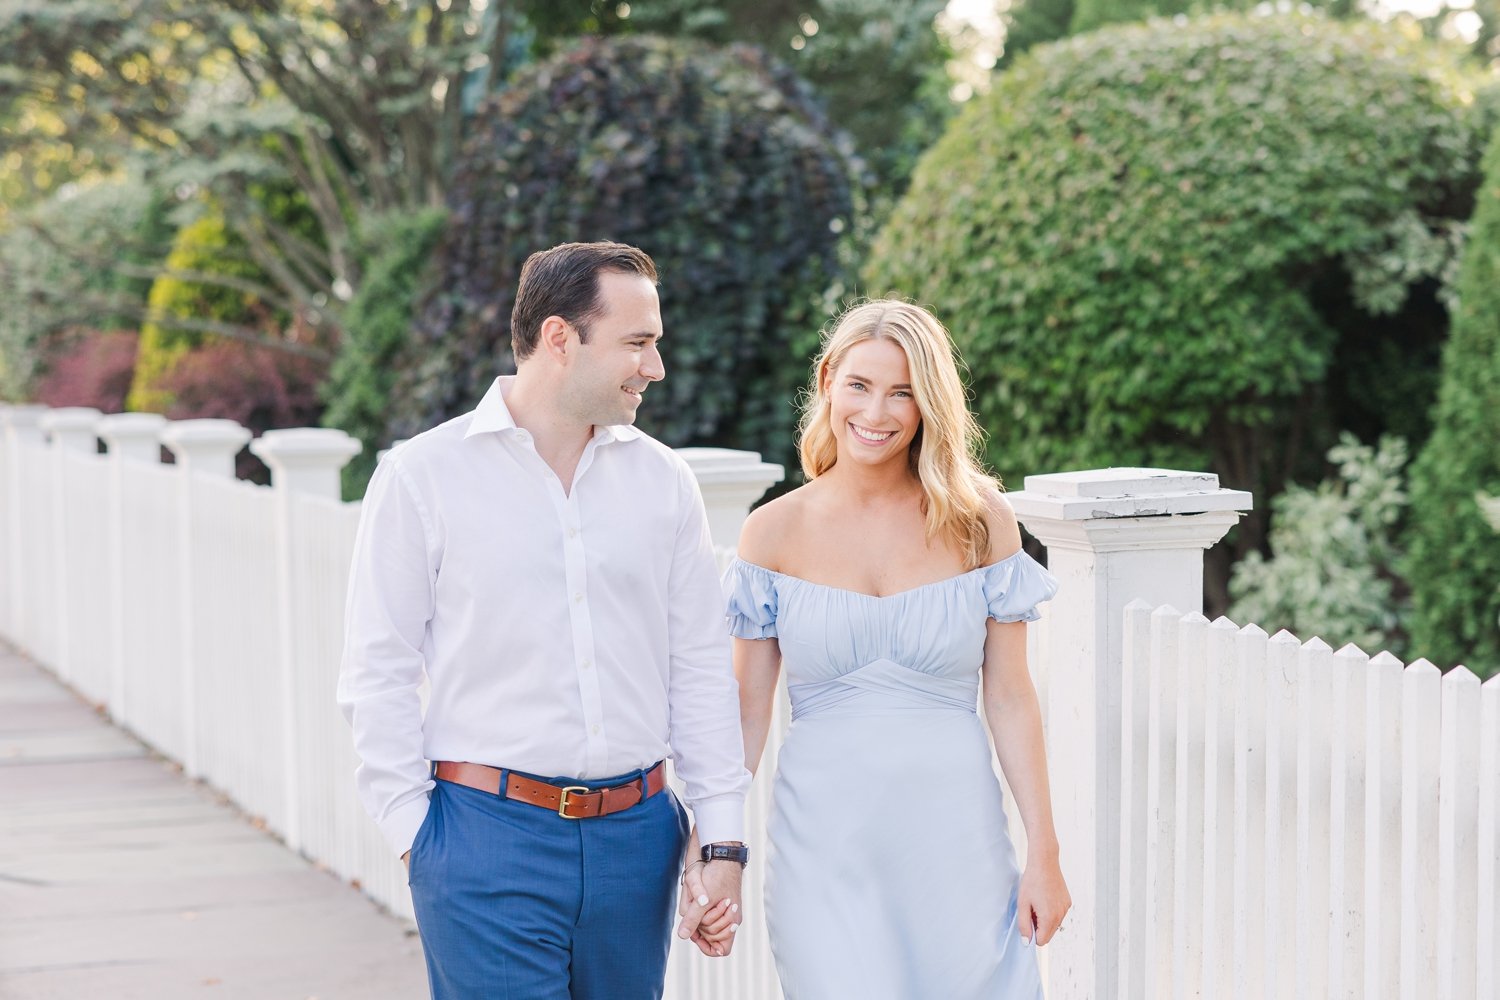 southport-summer-engagement-session-fairfield-connecticut-photographer-shaina-lee-photography